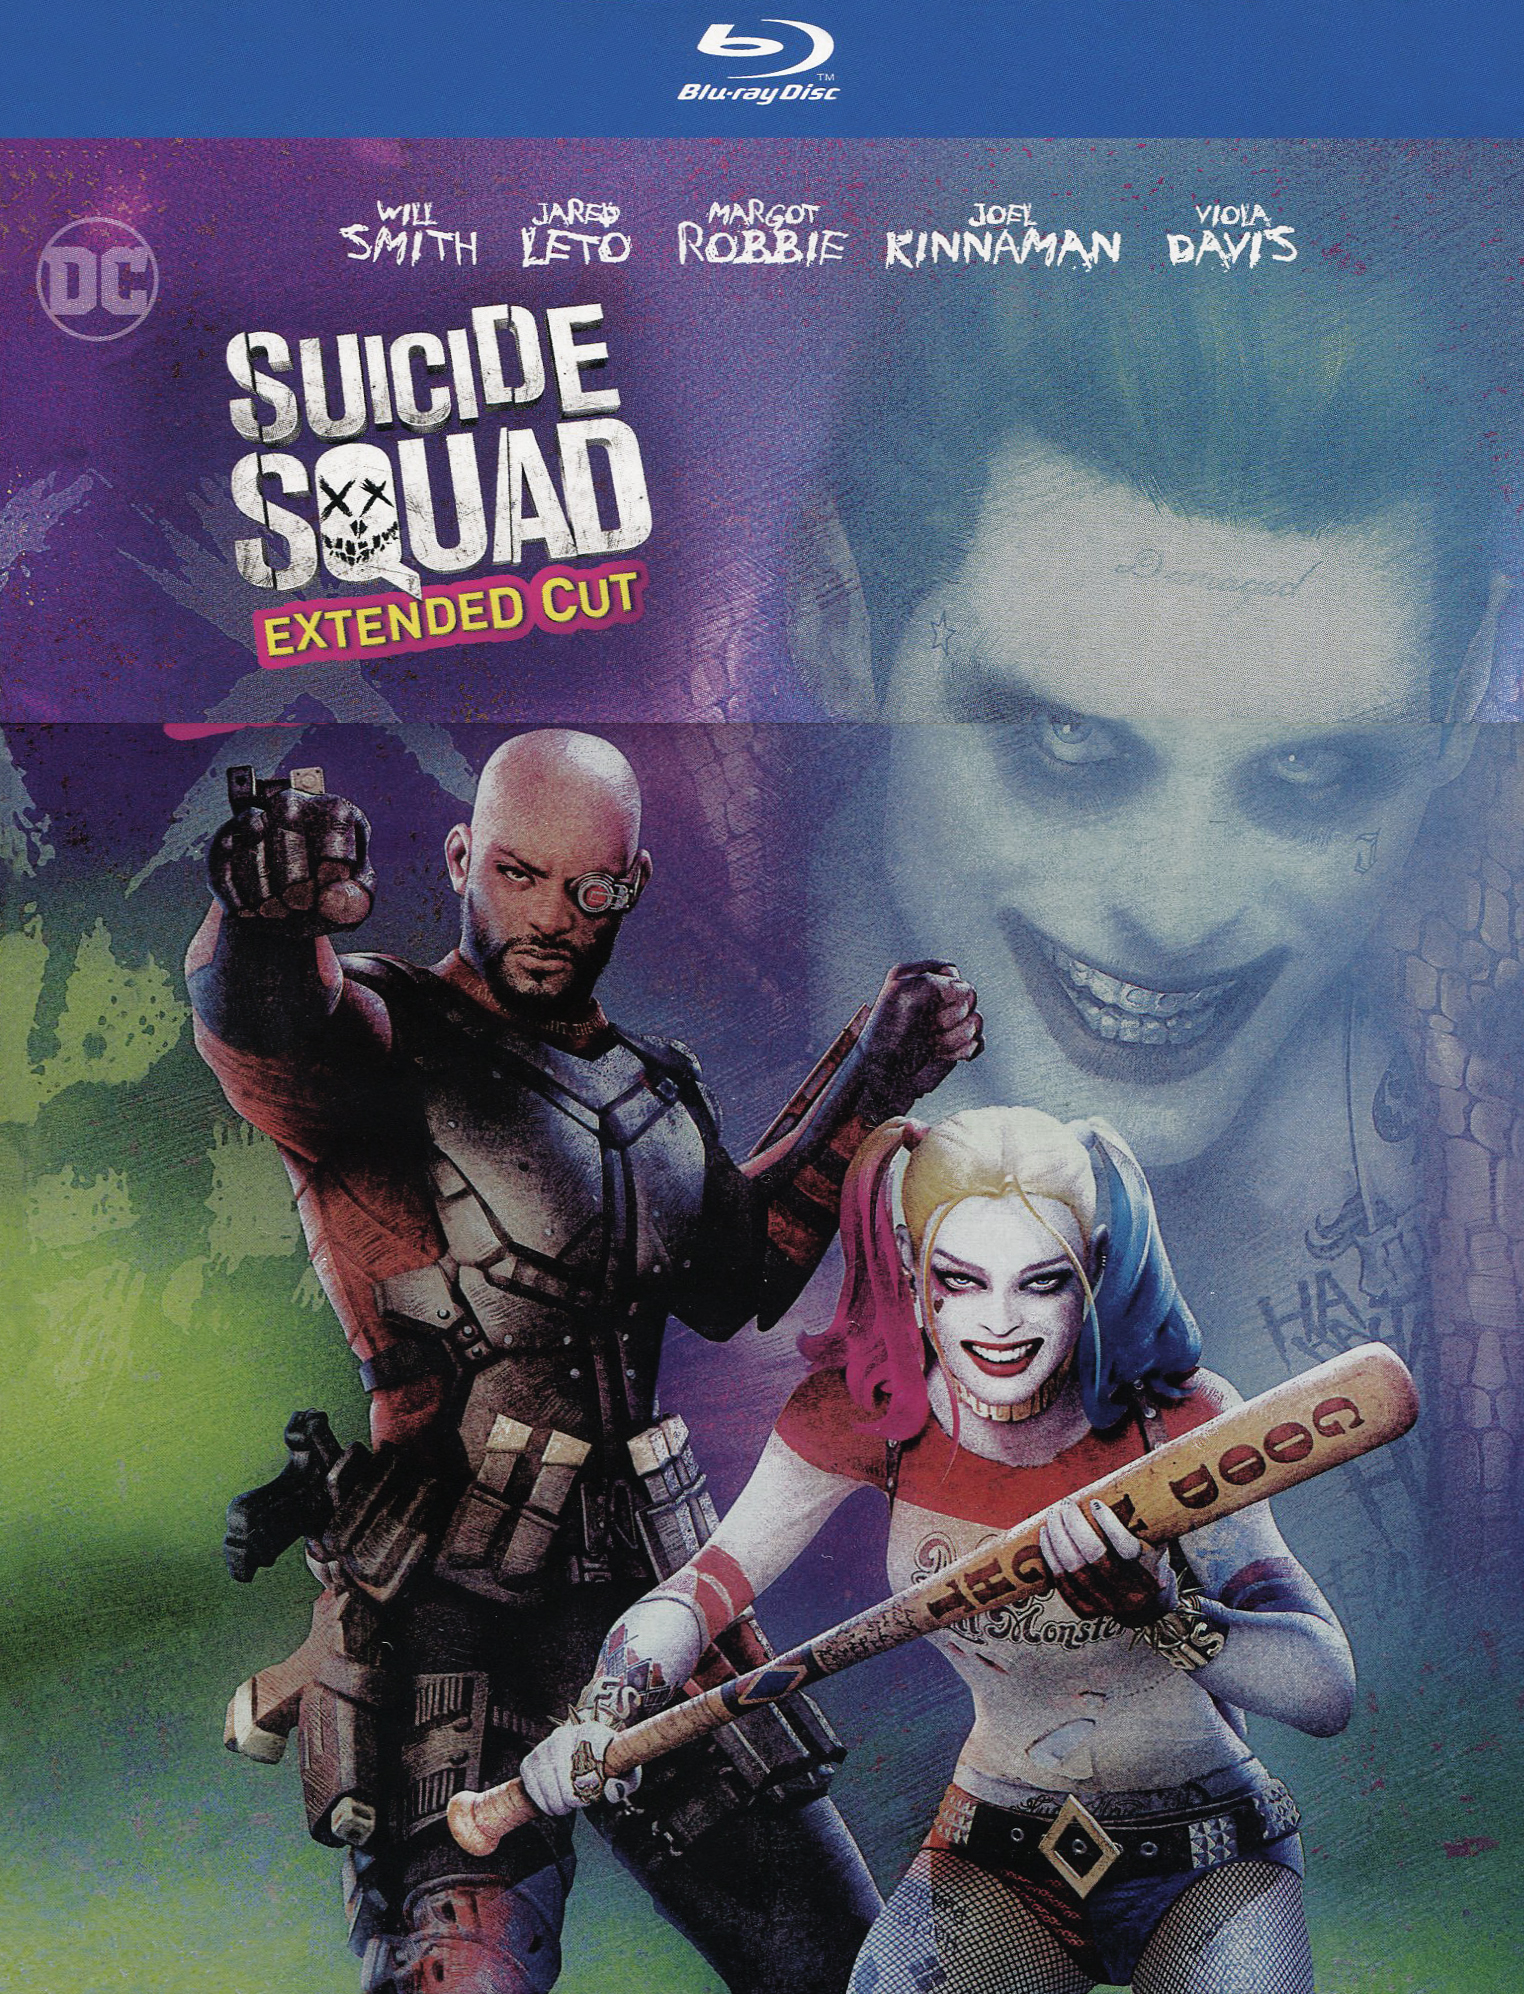 Suicide Squad [Extended Cut] [Blu-ray] [2016] - Best Buy